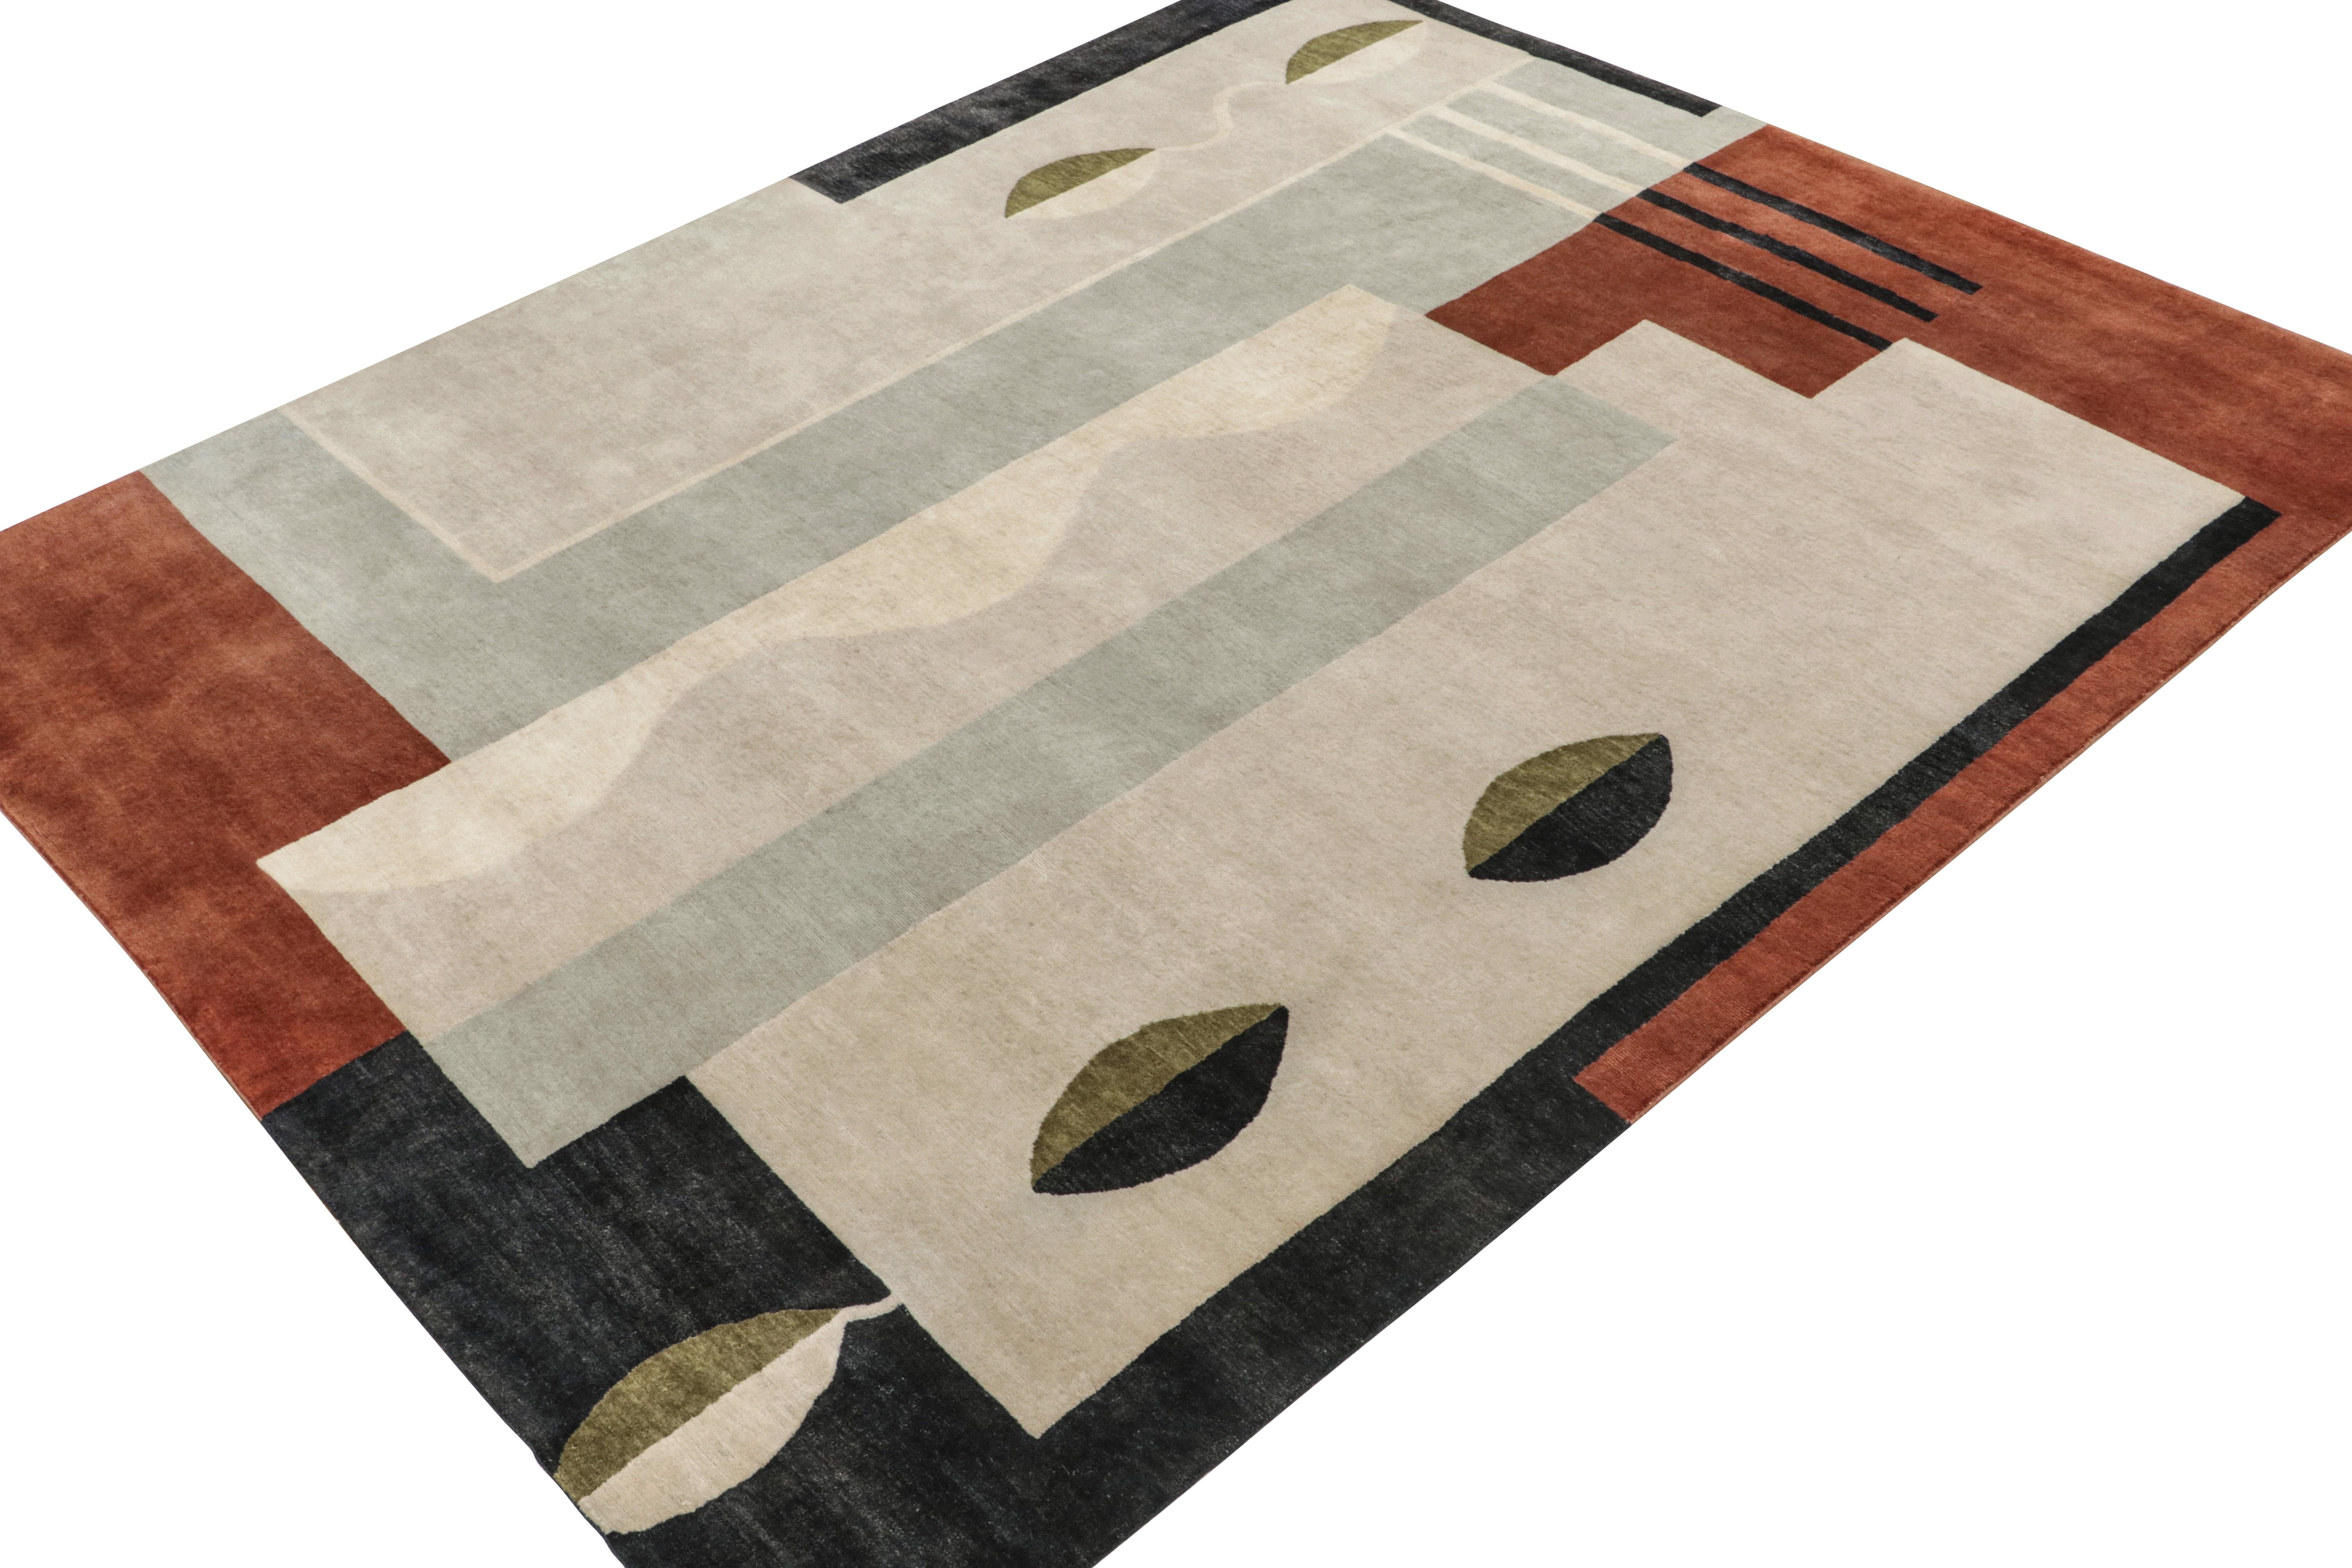 This 8x10 rug is the next addition to Rug & Kilim’s classic-inspired French Deco Collection. Hand-knotted in wool, silk and cotton, its design draws on the titular Art Deco rug styles of the 1920s in a new high-end quality.

Further on the Design: